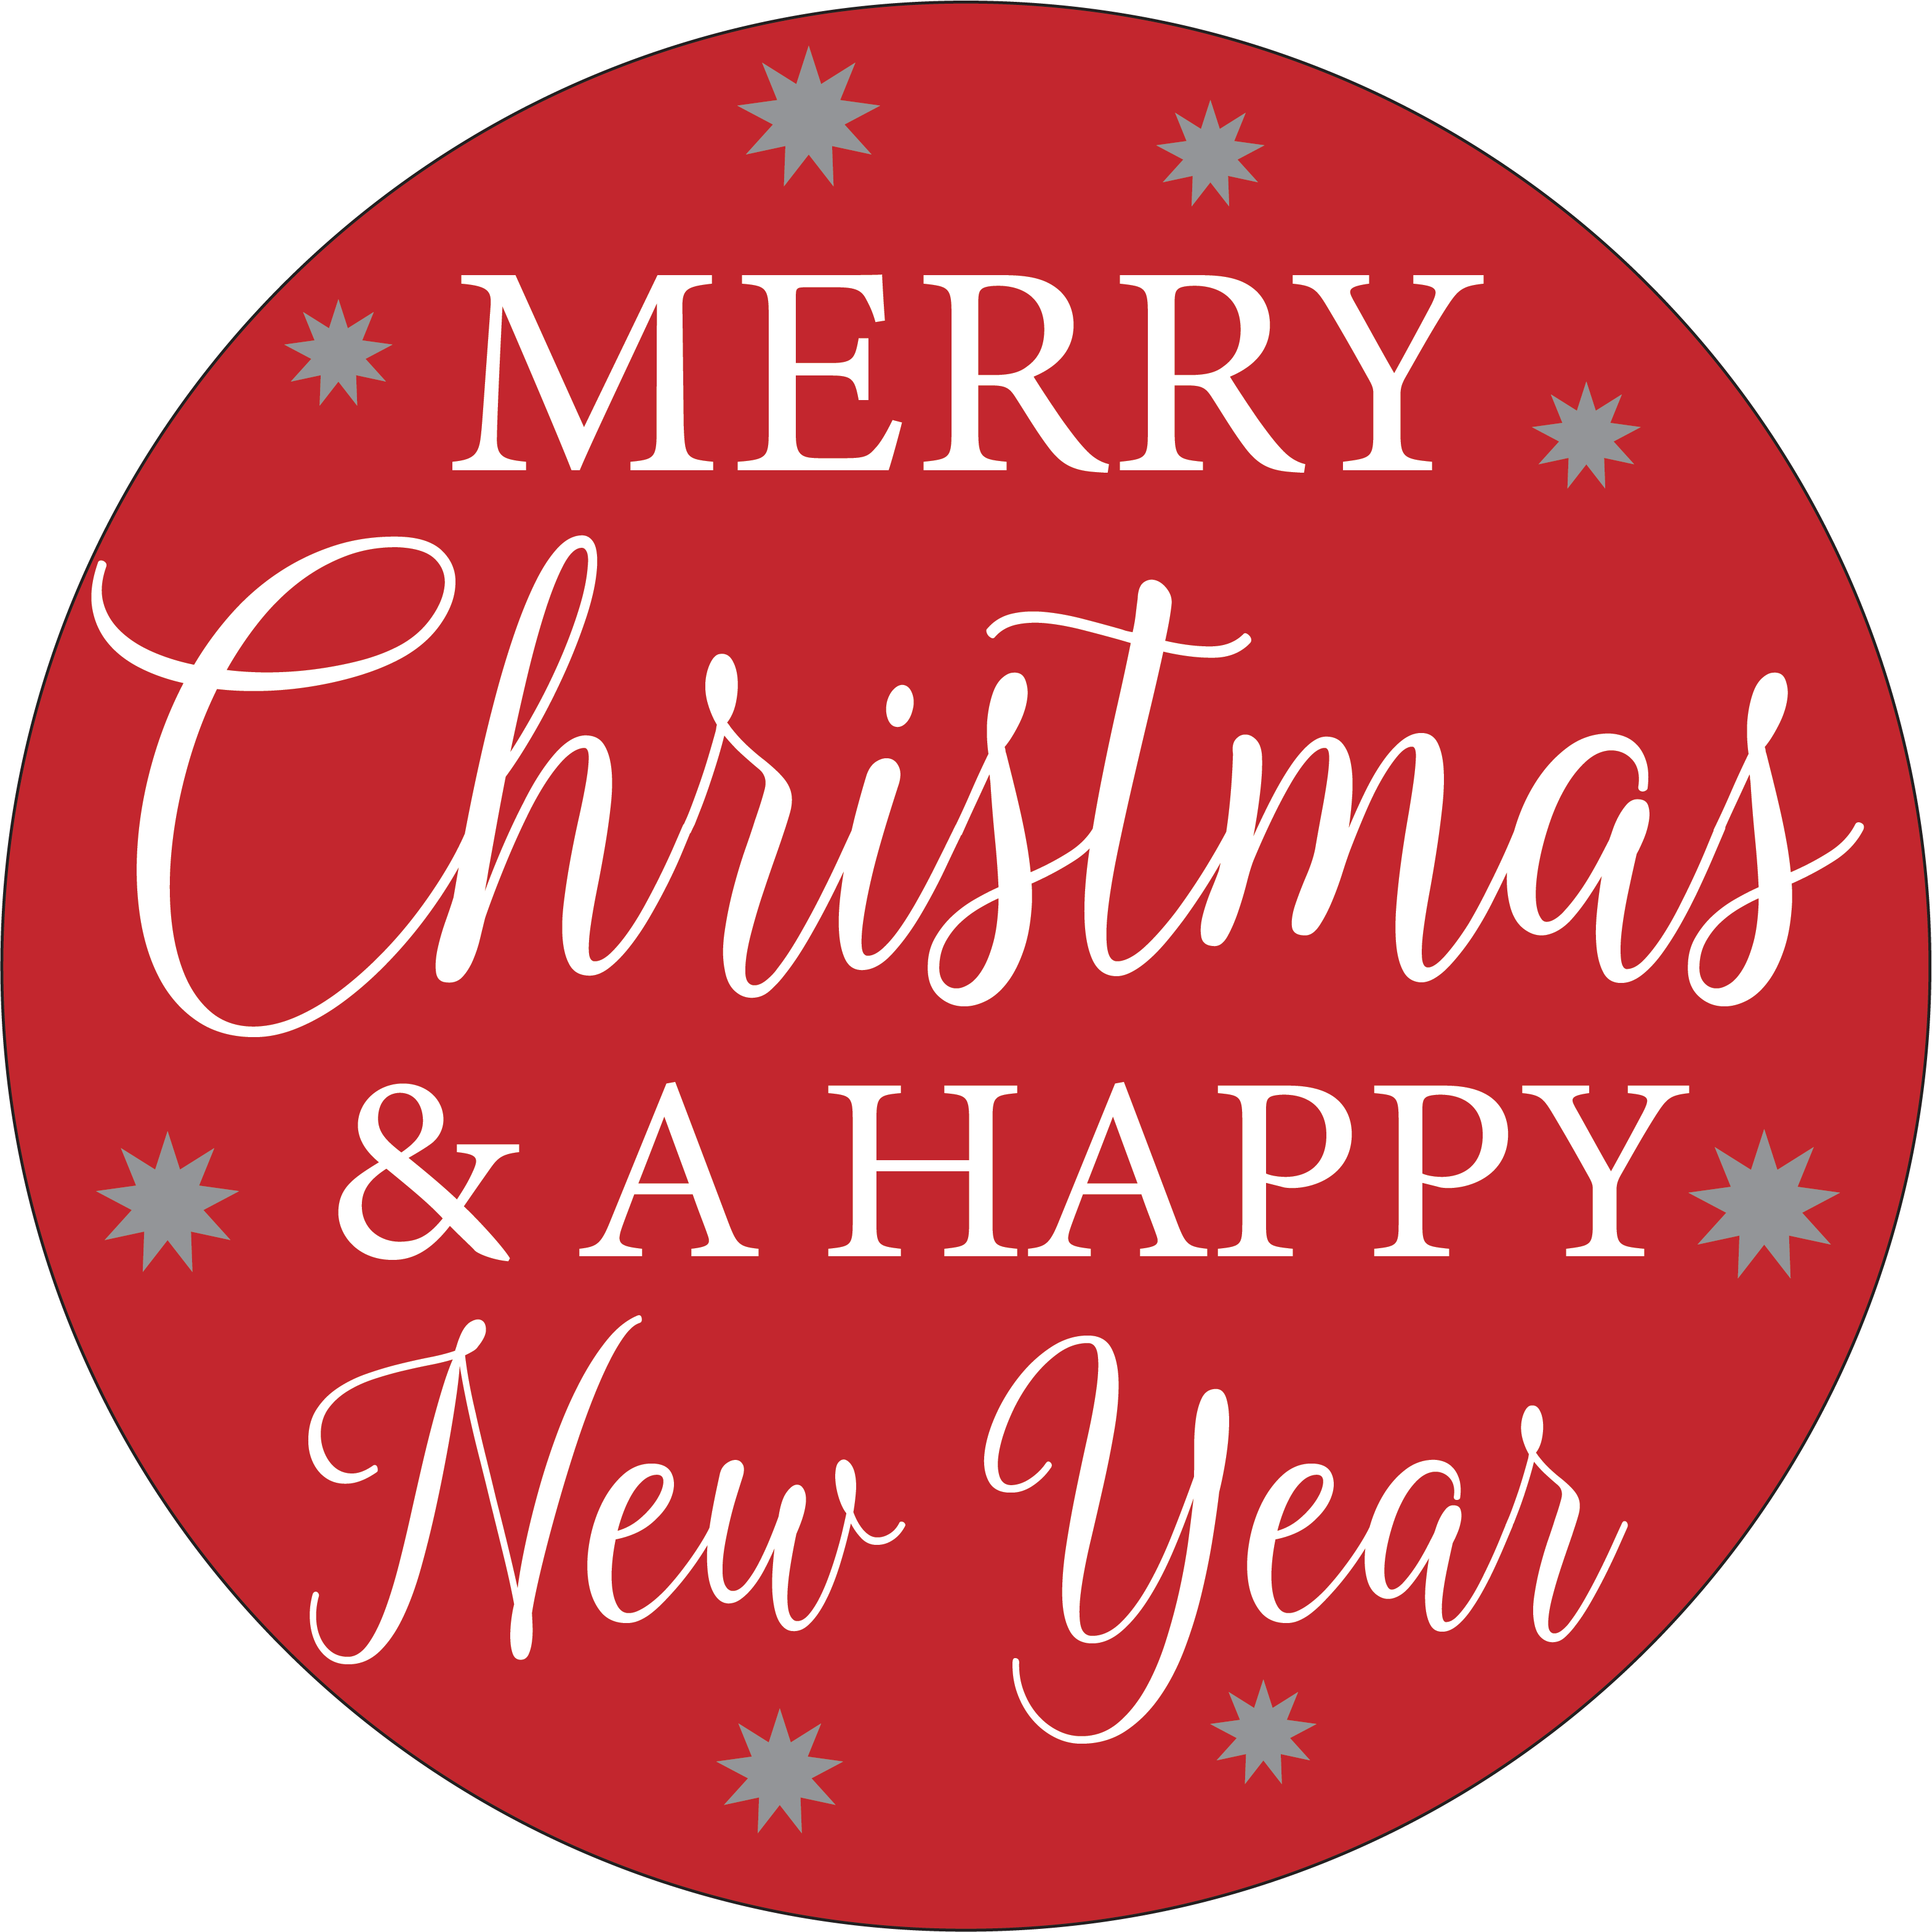 Merry Christmas & a Happy New Year: Swappable Round Door Hanger Insert - Paisley Grace Makery